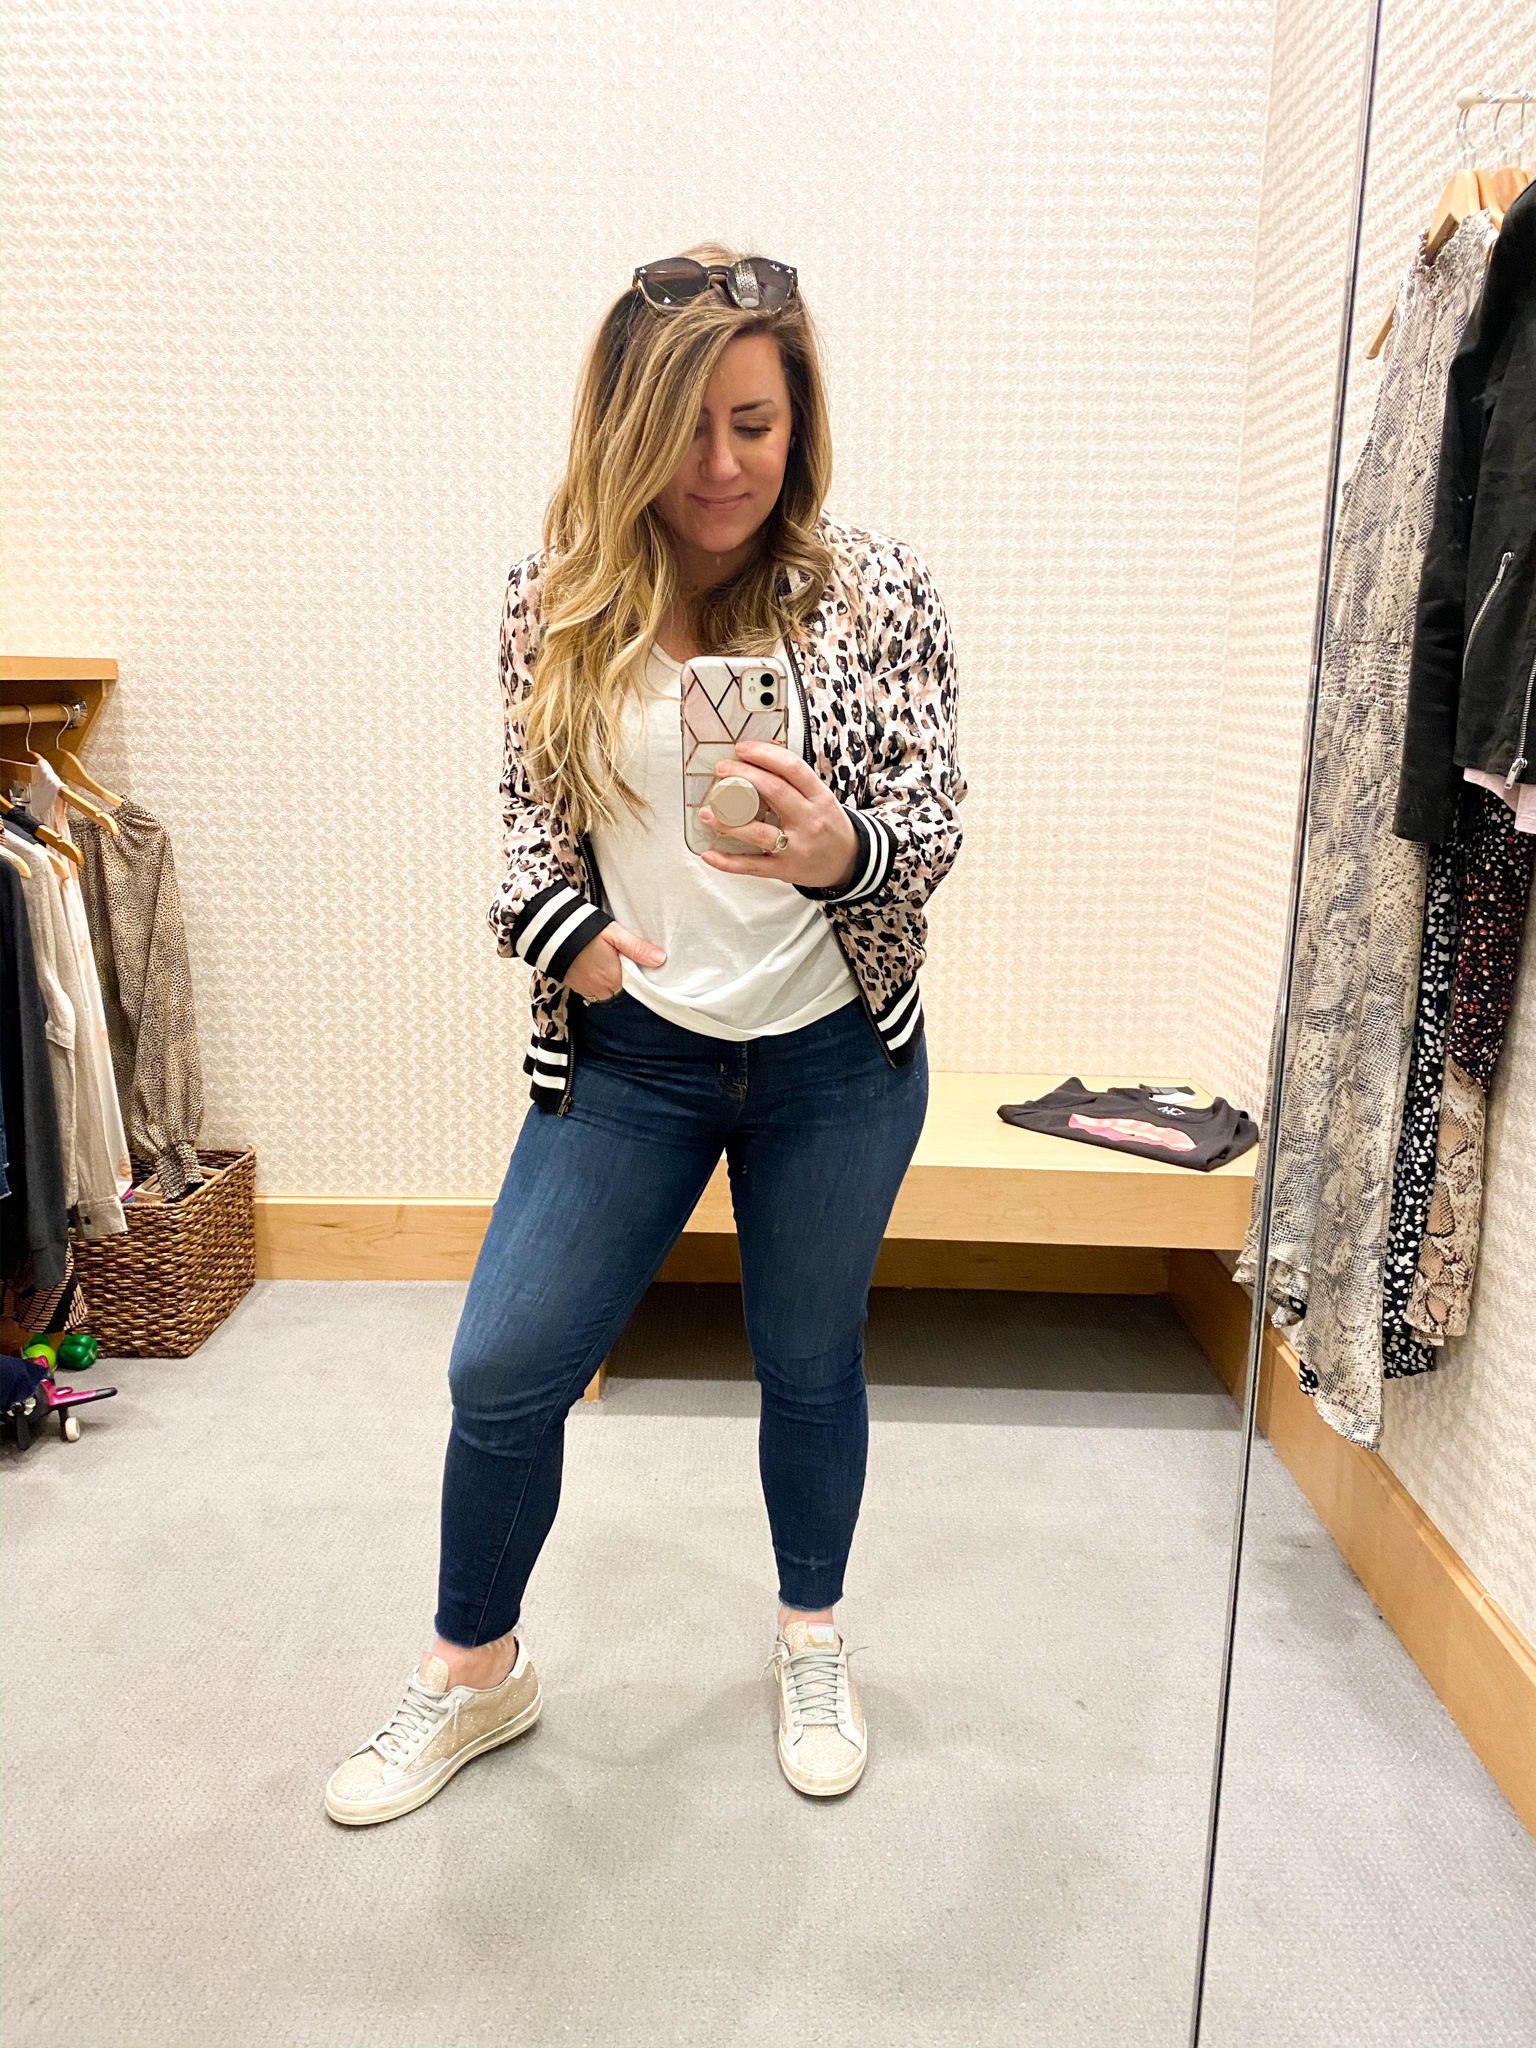 Evereve Outfits by popular Ohio fashion blog, Coffee Beans and Bobby Pins: image of a woman standing in a dressing room and wearing Evereve Agolde Sophie Crop, Evereve P448 Glitter Sneaker, Evereve Peyton Jensen Brooke Bomber Jacket, and Evereve Z Supply Short Sleeve V Neck Tee.